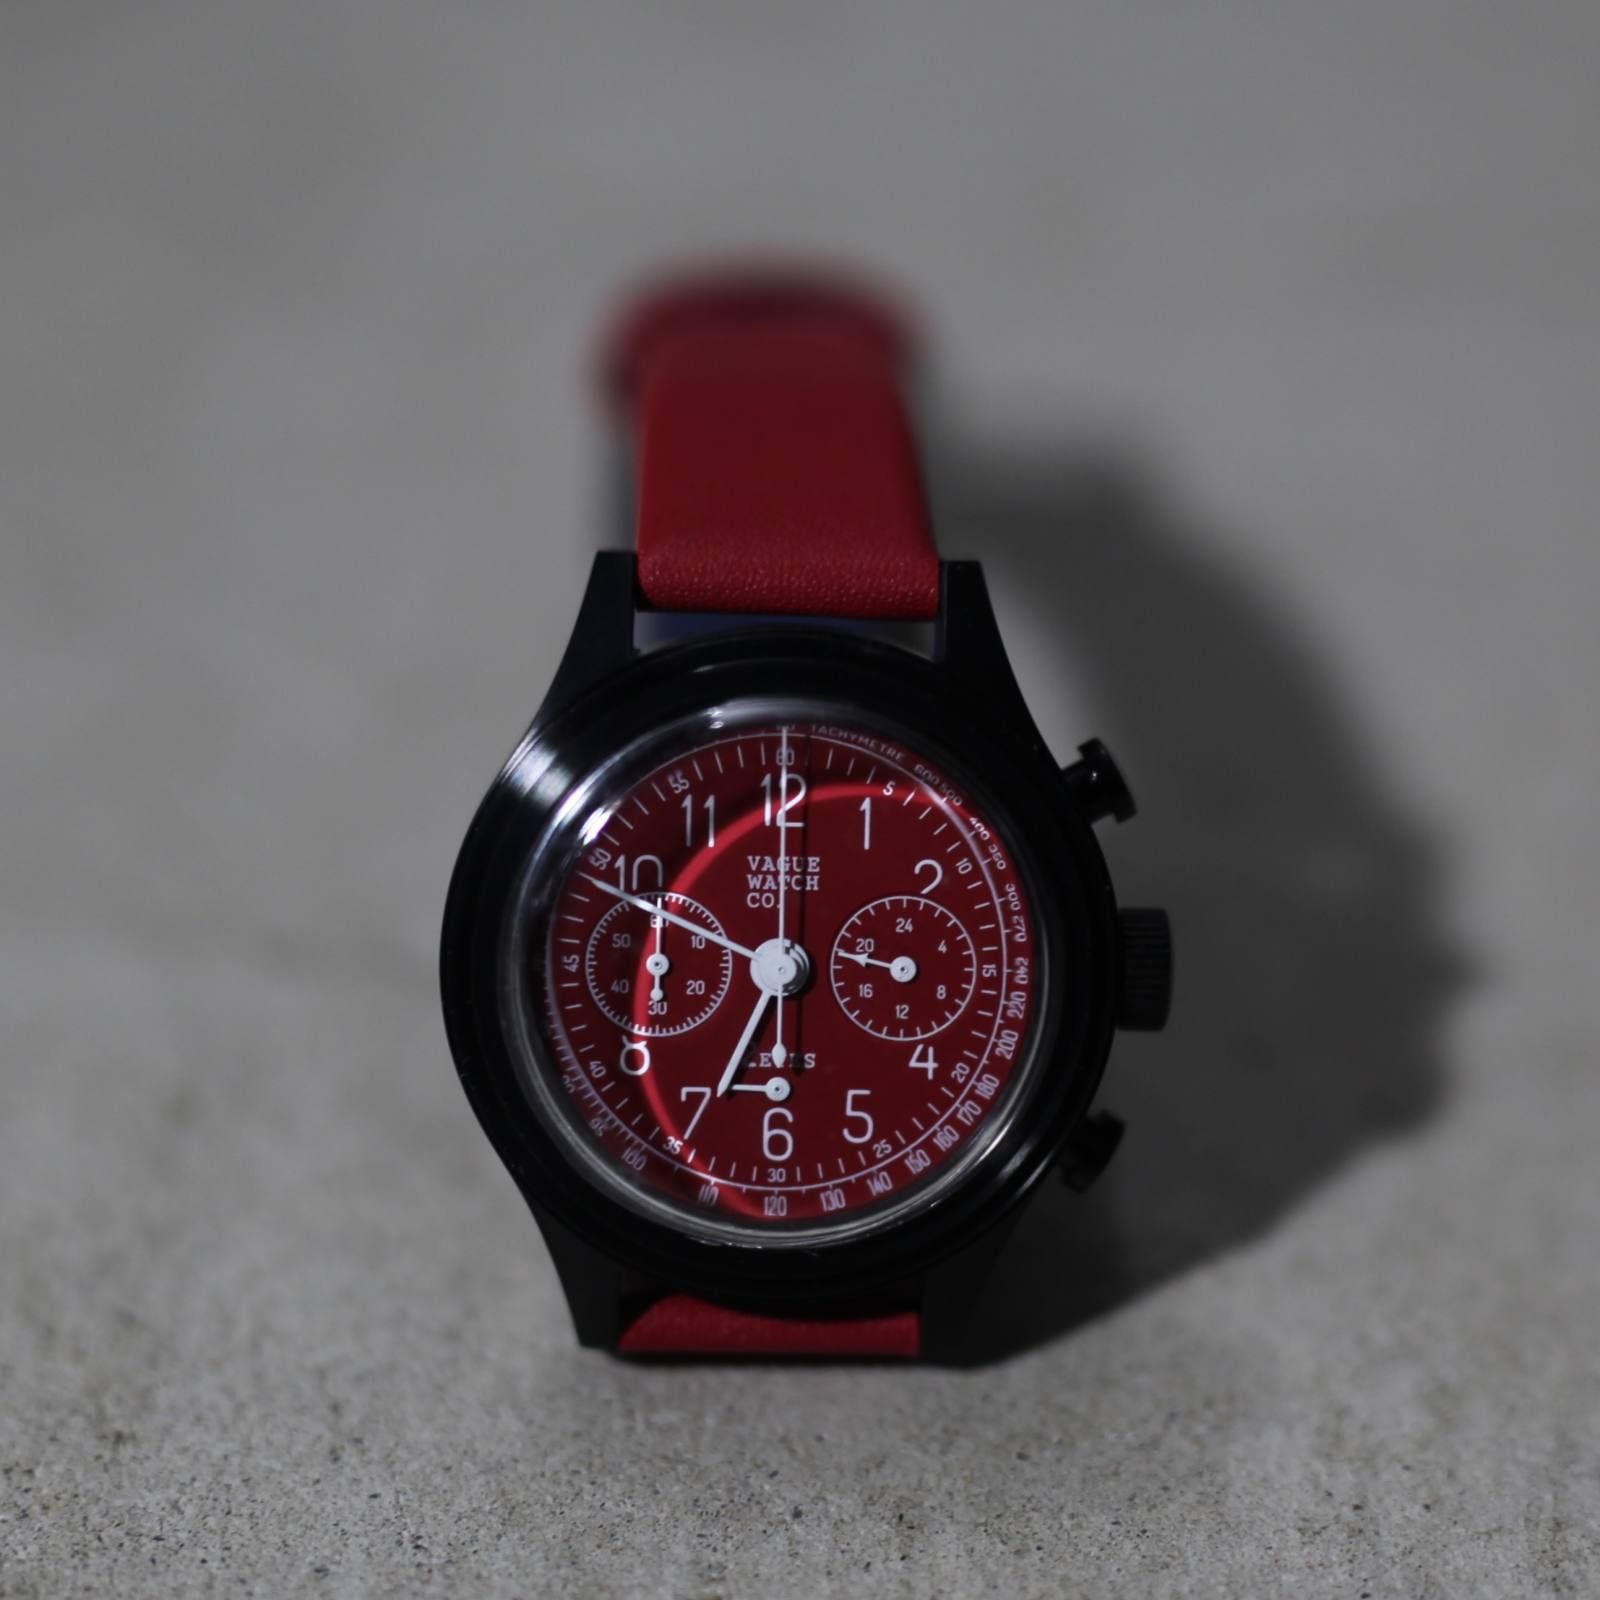 VAGUE WATCH CO. 【お取り寄せ注文可能】2EYES ACRMTSM ONLINE STORE